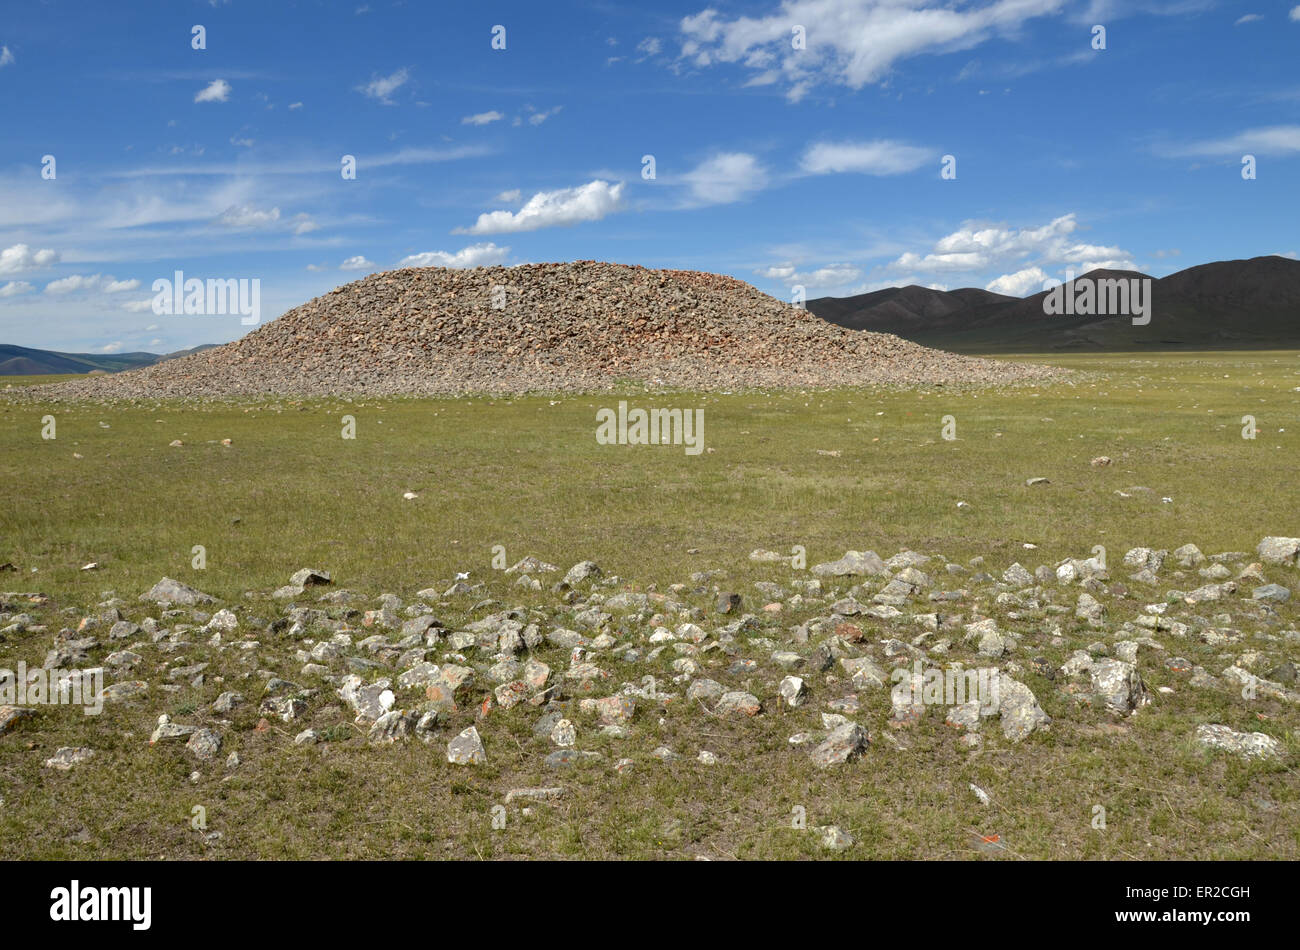 A burial mound in the Arhangay province, central Mongolia. In the foreground is a stone circle around the monument. Stock Photo